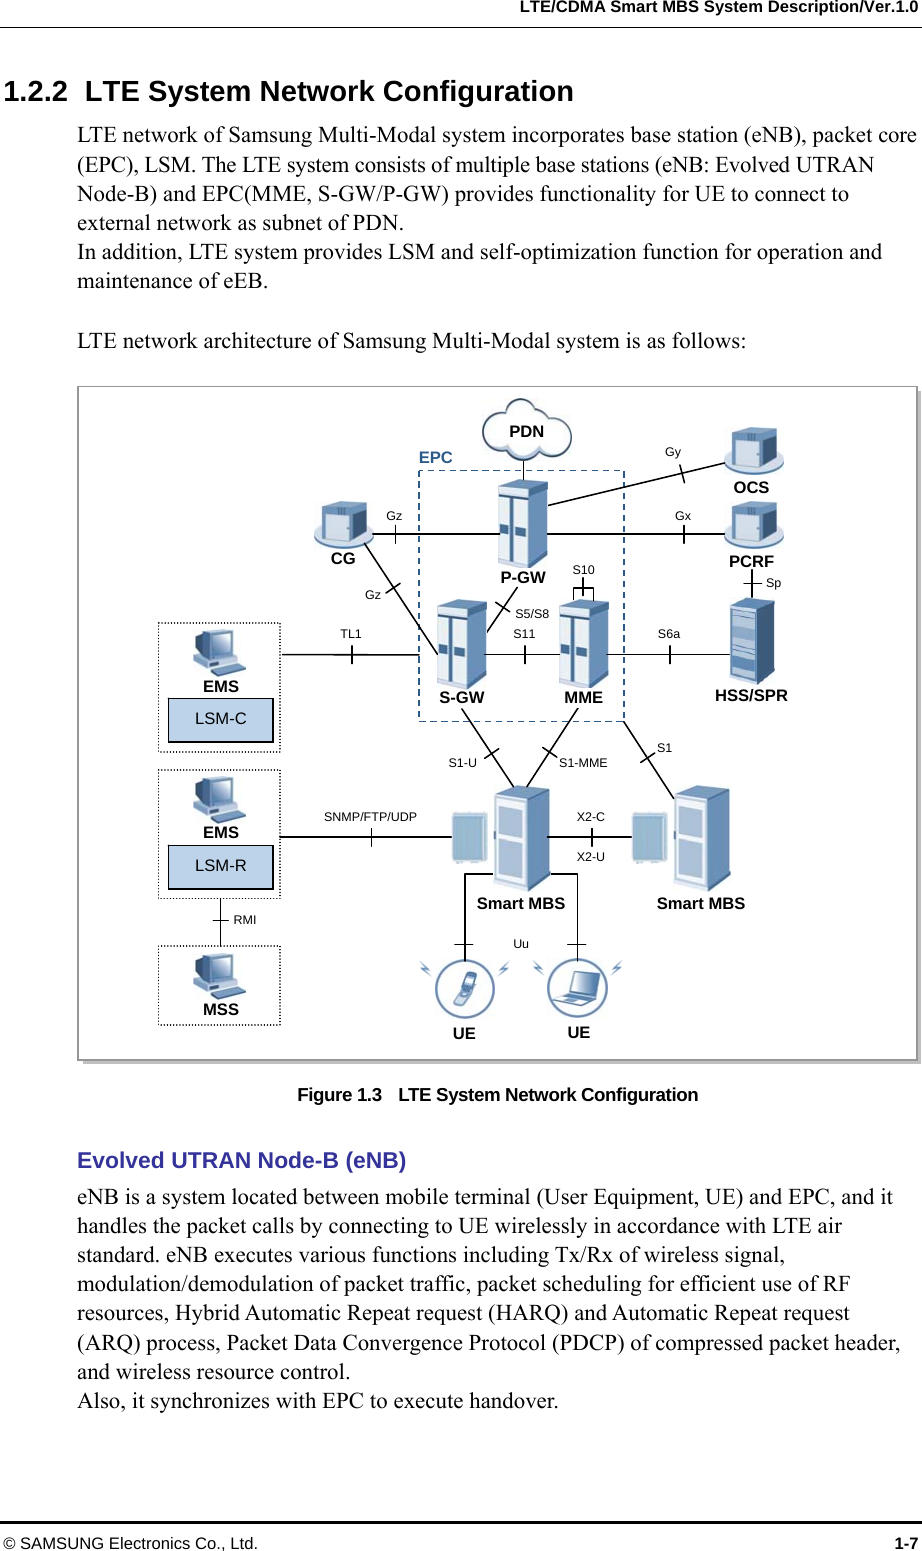   LTE/CDMA Smart MBS System Description/Ver.1.0 © SAMSUNG Electronics Co., Ltd.  1-7 1.2.2  LTE System Network Configuration LTE network of Samsung Multi-Modal system incorporates base station (eNB), packet core (EPC), LSM. The LTE system consists of multiple base stations (eNB: Evolved UTRAN Node-B) and EPC(MME, S-GW/P-GW) provides functionality for UE to connect to external network as subnet of PDN. In addition, LTE system provides LSM and self-optimization function for operation and maintenance of eEB.  LTE network architecture of Samsung Multi-Modal system is as follows:  Figure 1.3    LTE System Network Configuration  Evolved UTRAN Node-B (eNB) eNB is a system located between mobile terminal (User Equipment, UE) and EPC, and it handles the packet calls by connecting to UE wirelessly in accordance with LTE air standard. eNB executes various functions including Tx/Rx of wireless signal, modulation/demodulation of packet traffic, packet scheduling for efficient use of RF resources, Hybrid Automatic Repeat request (HARQ) and Automatic Repeat request (ARQ) process, Packet Data Convergence Protocol (PDCP) of compressed packet header, and wireless resource control.   Also, it synchronizes with EPC to execute handover.    UE UECG  PCRF HSS/SPR Uu S1-U  S1-MME EMS LSM-C Smart MBS Smart MBS EMS LSM-R MSS OCS EPC RMI S5/S8 Gx S-GW Sp TL1 MME P-GW Gy S11  S6a Gz Gz S1 S10 PDN X2-C X2-U SNMP/FTP/UDP 